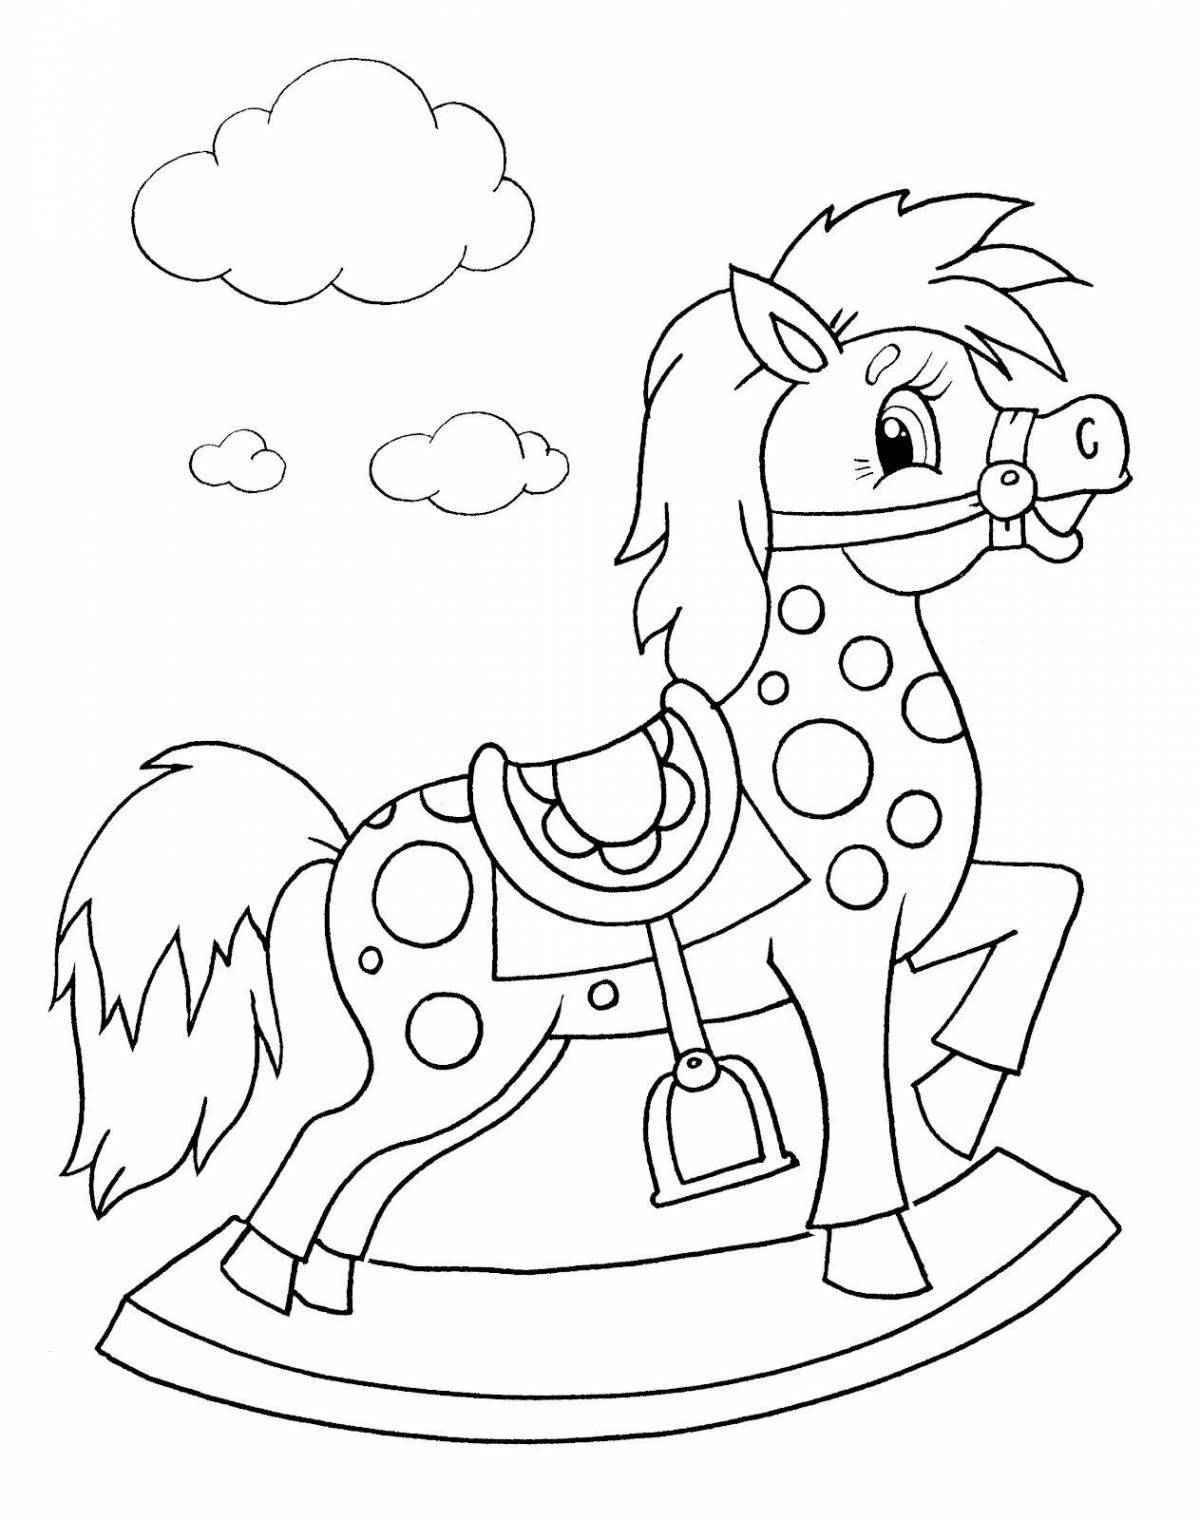 Coloring for kids 5